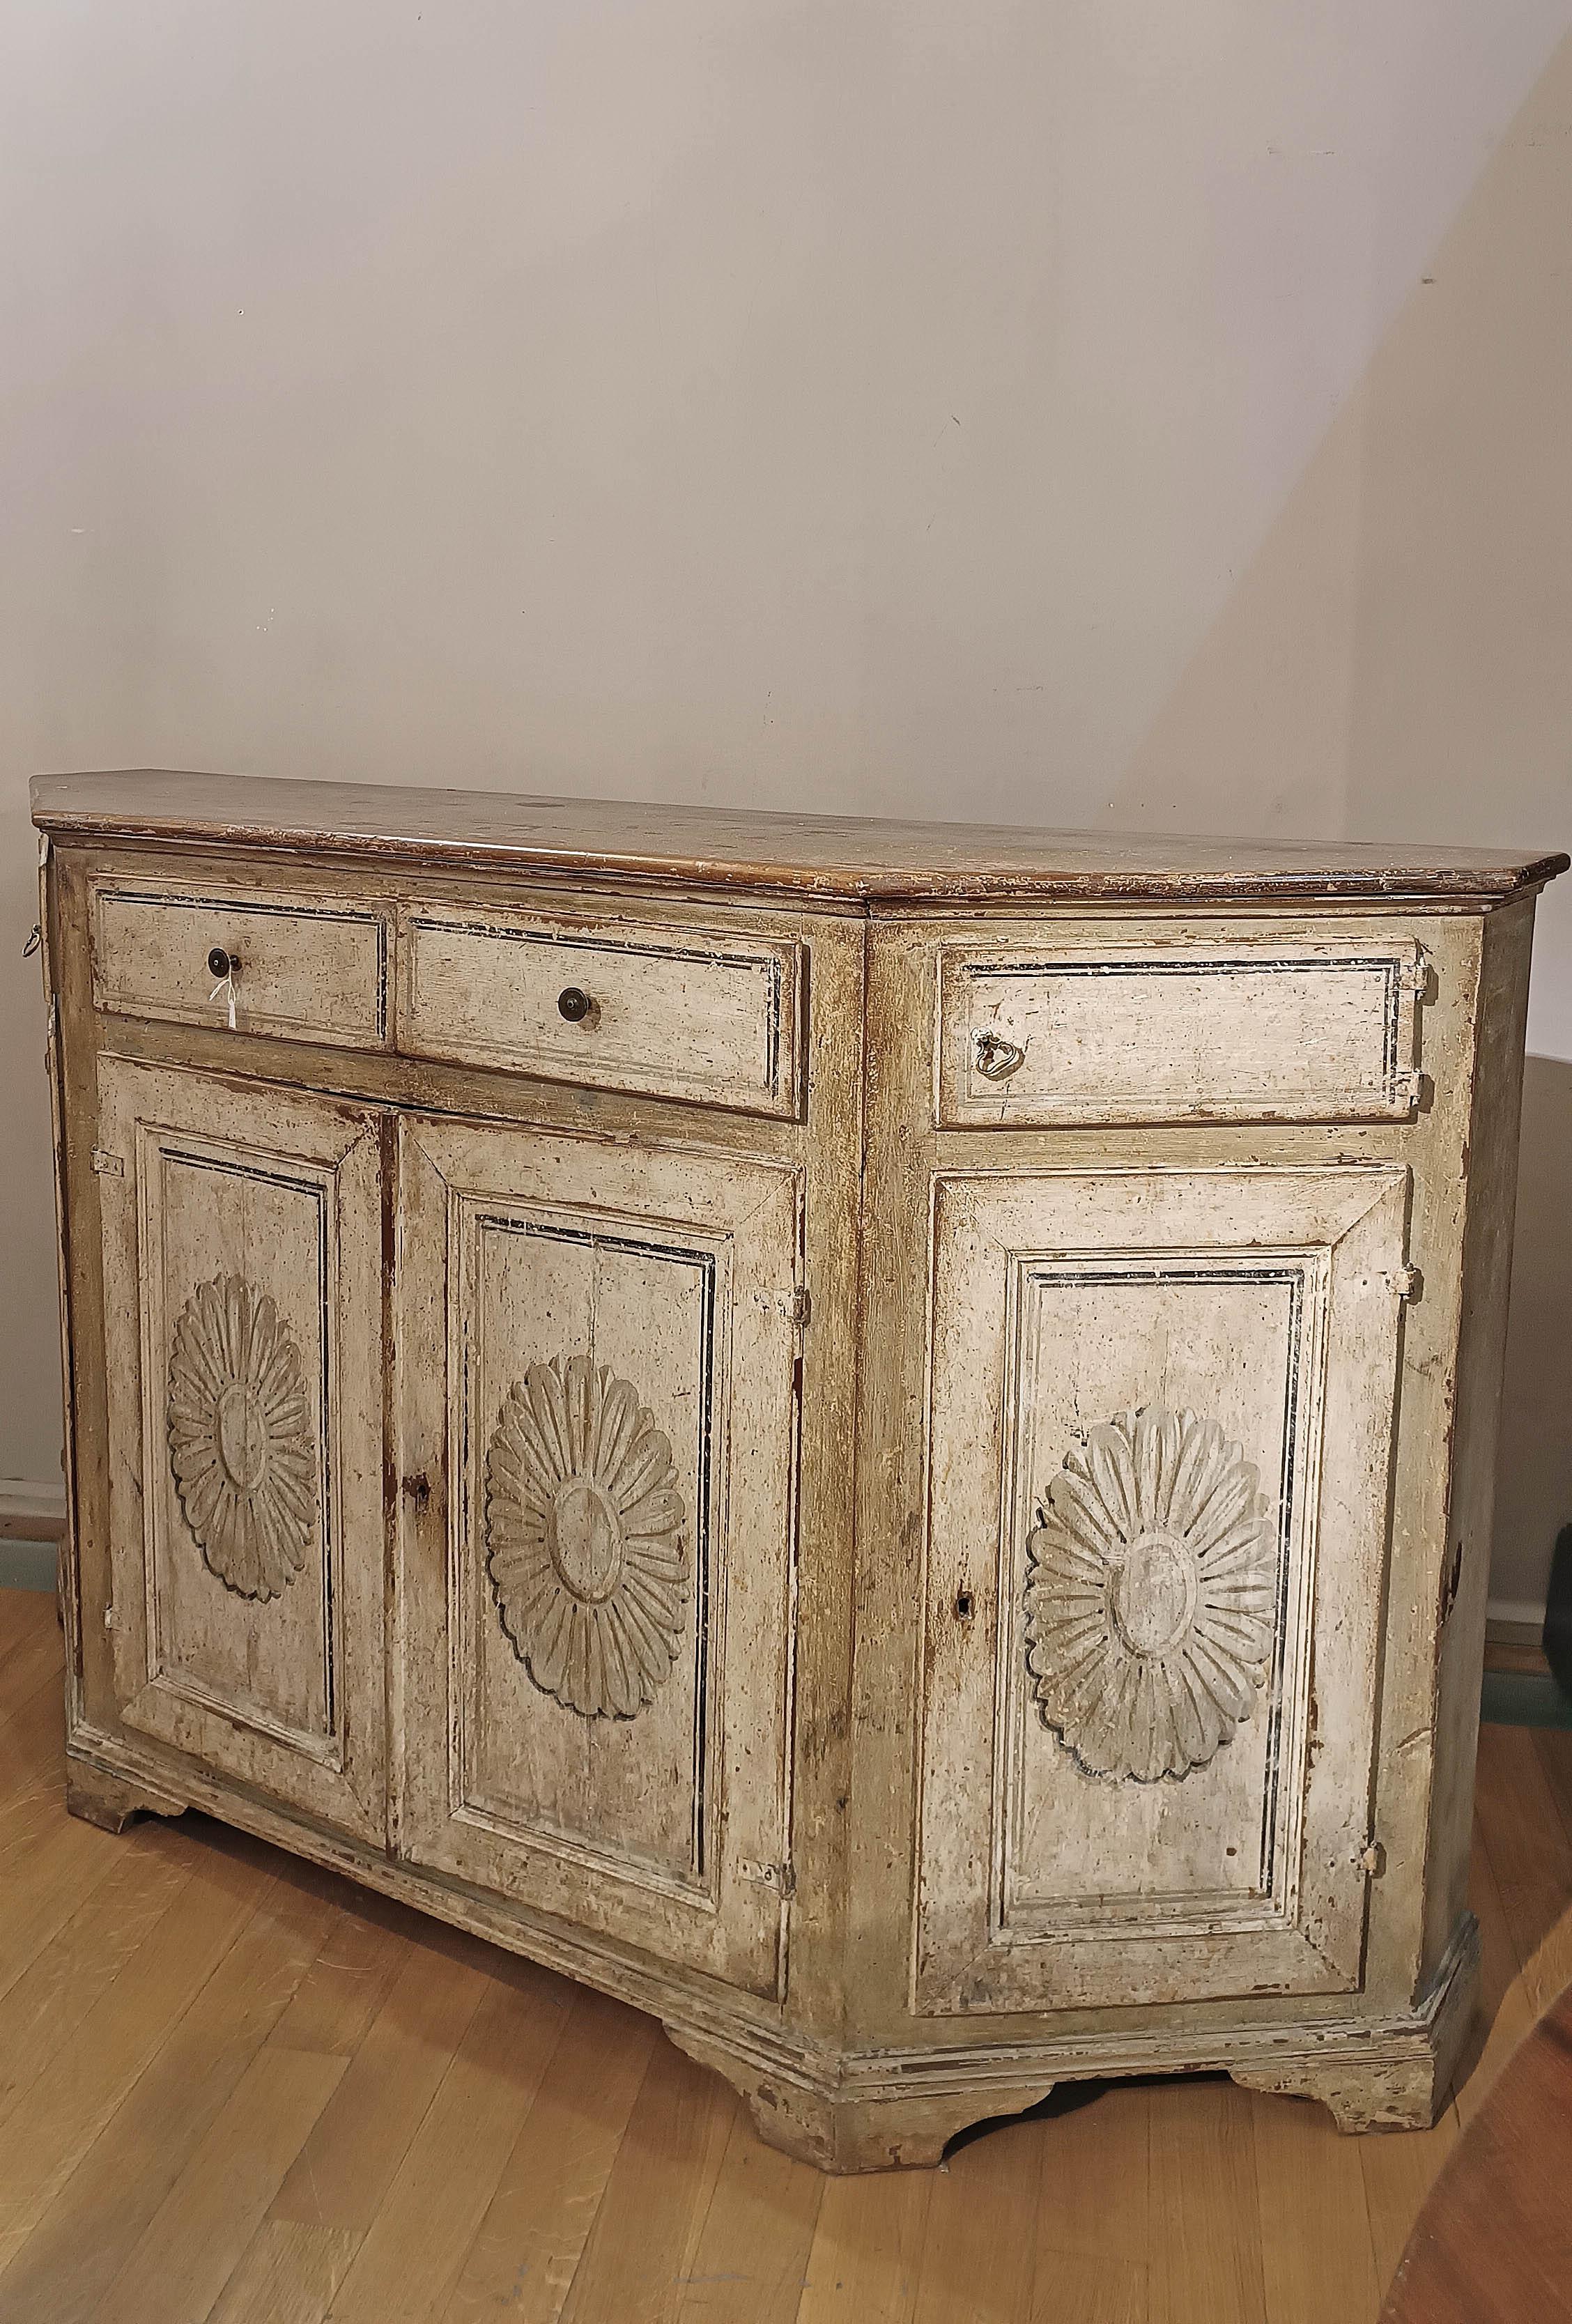 Beautiful neoclassical sideboard in solid wood painted with gray colors and decorations typical of the Louis XVI period. The shelf feet also give it a timeless elegance. On the upper part the sideboard has two drawers and two doors, the latter along